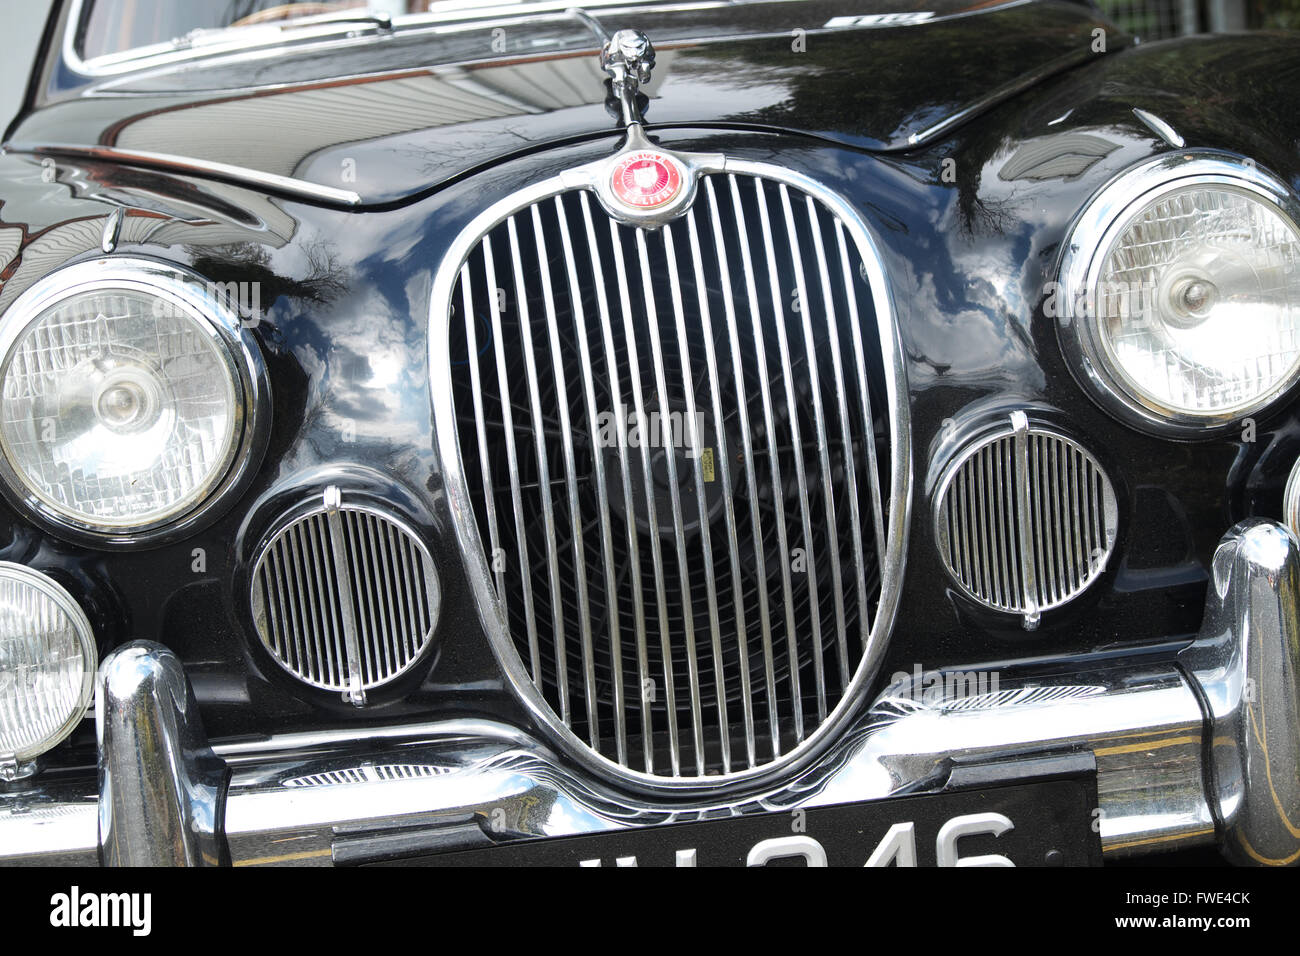 Classic British car the Jaguar Mark 1 with a 3.4 litre engine built in the 1960s sixties Stock Photo